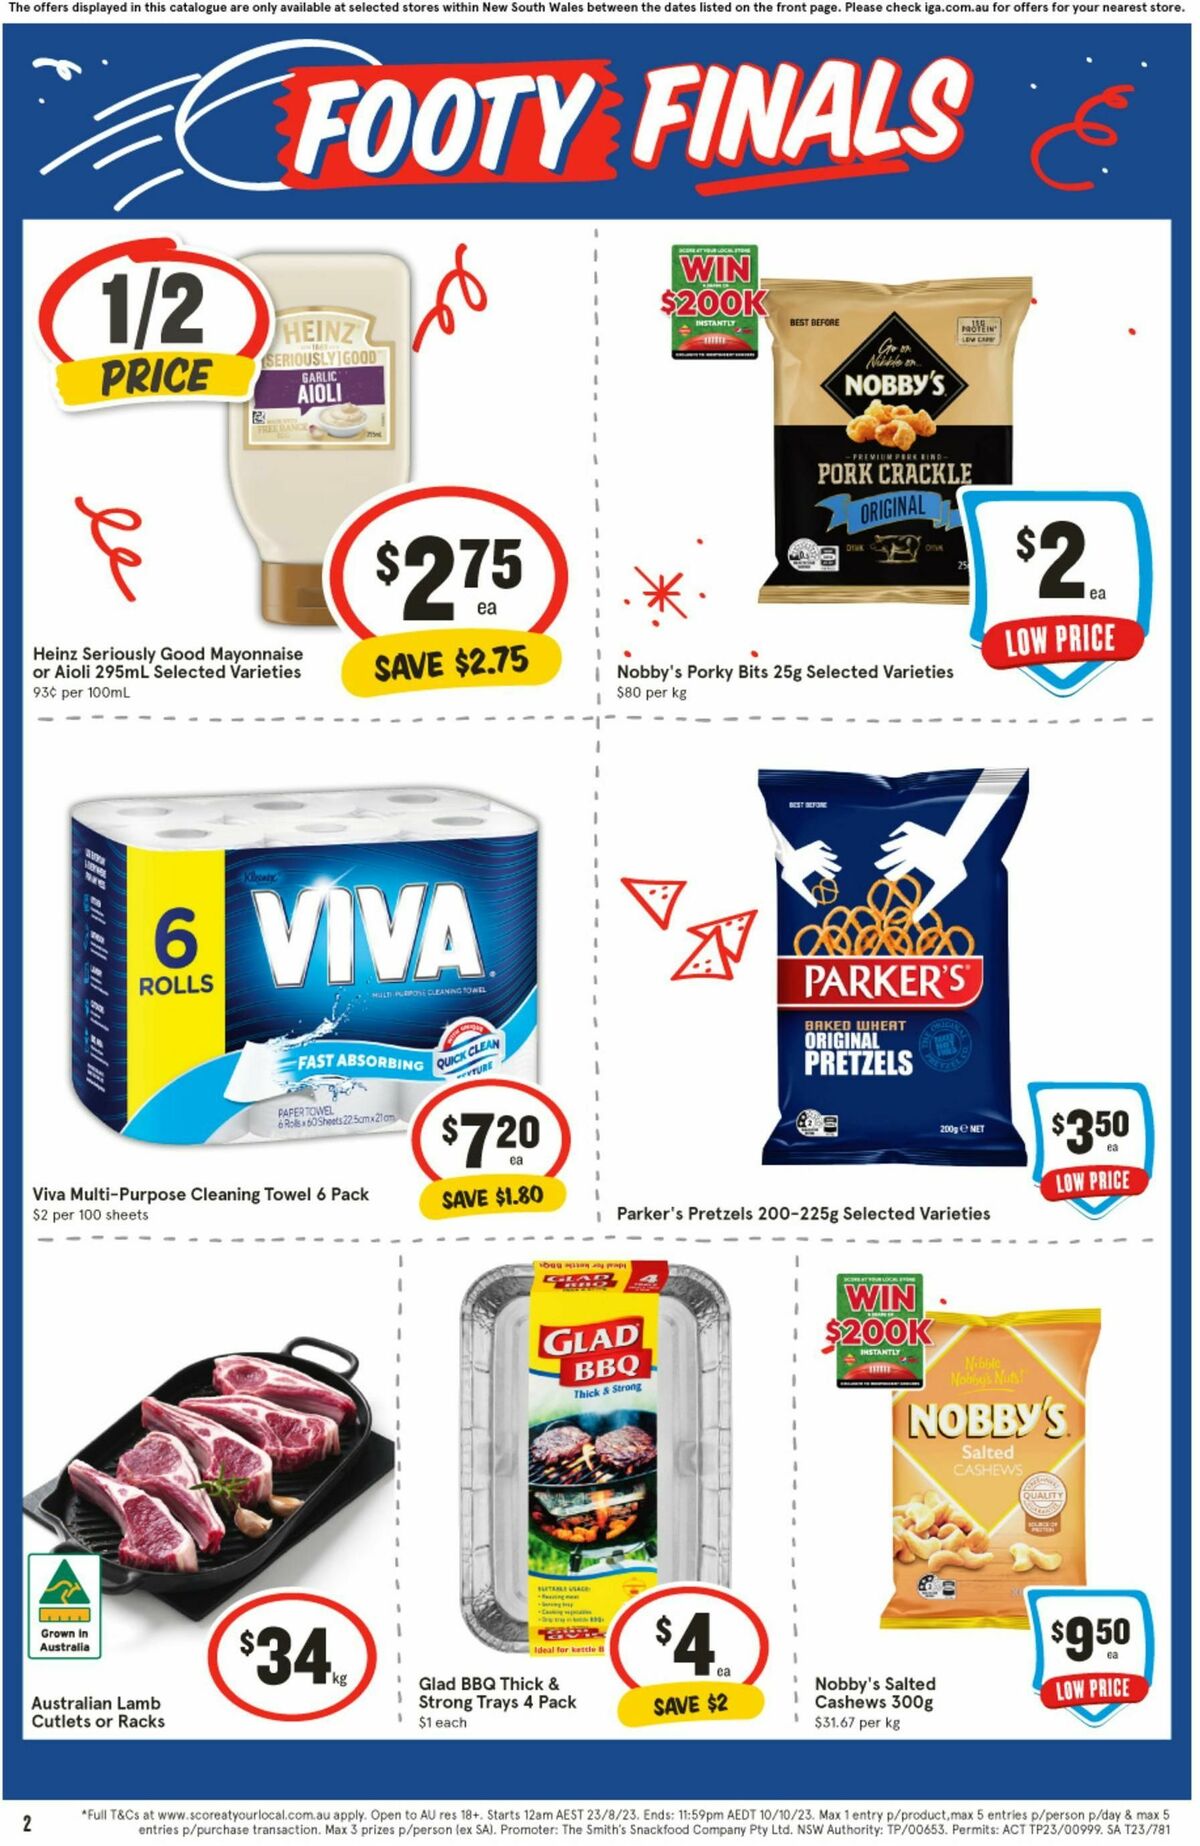 IGA Catalogues from 20 September